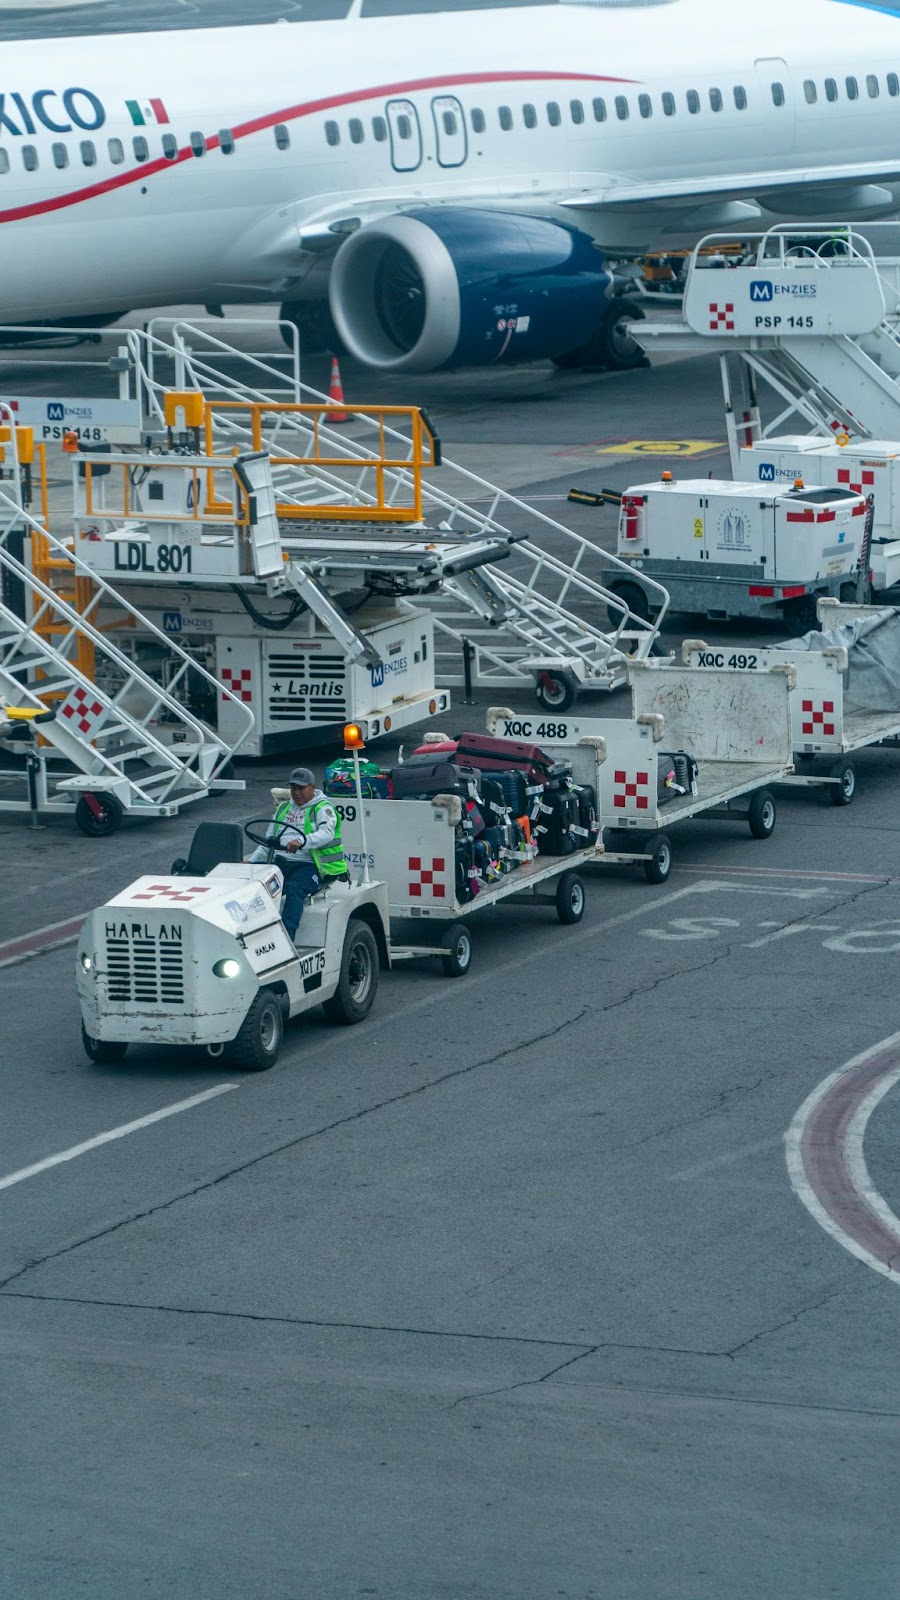 A class-VI forklift on an airplane tarmac tugging luggage away from an airplane